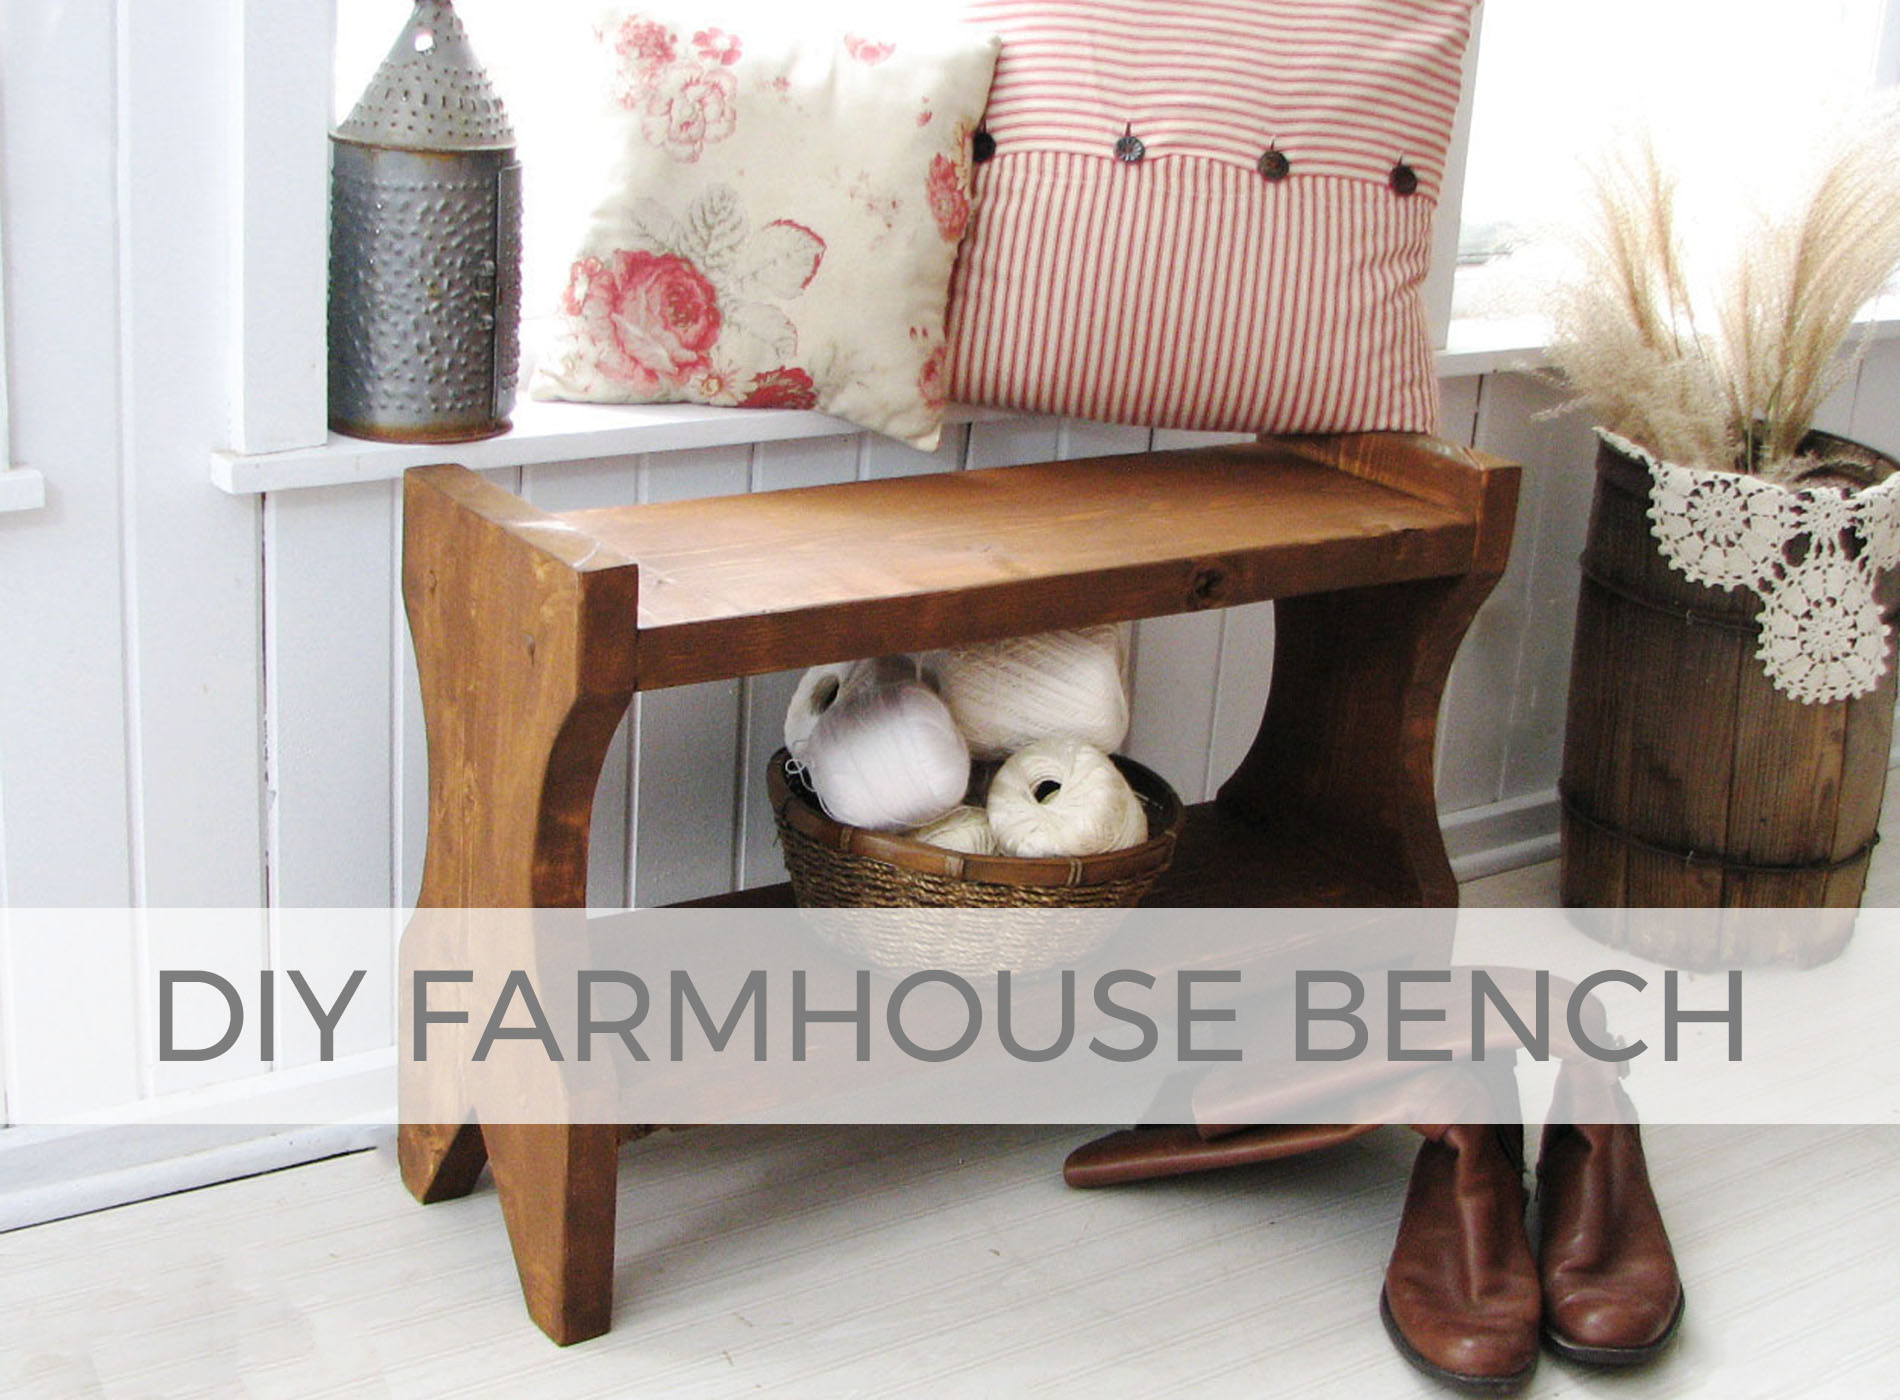 Build this rustic DIY farmhouse bench with tutorial by Larissa of Prodigal Pieces | prodigalpieces.com #prodigalpieces